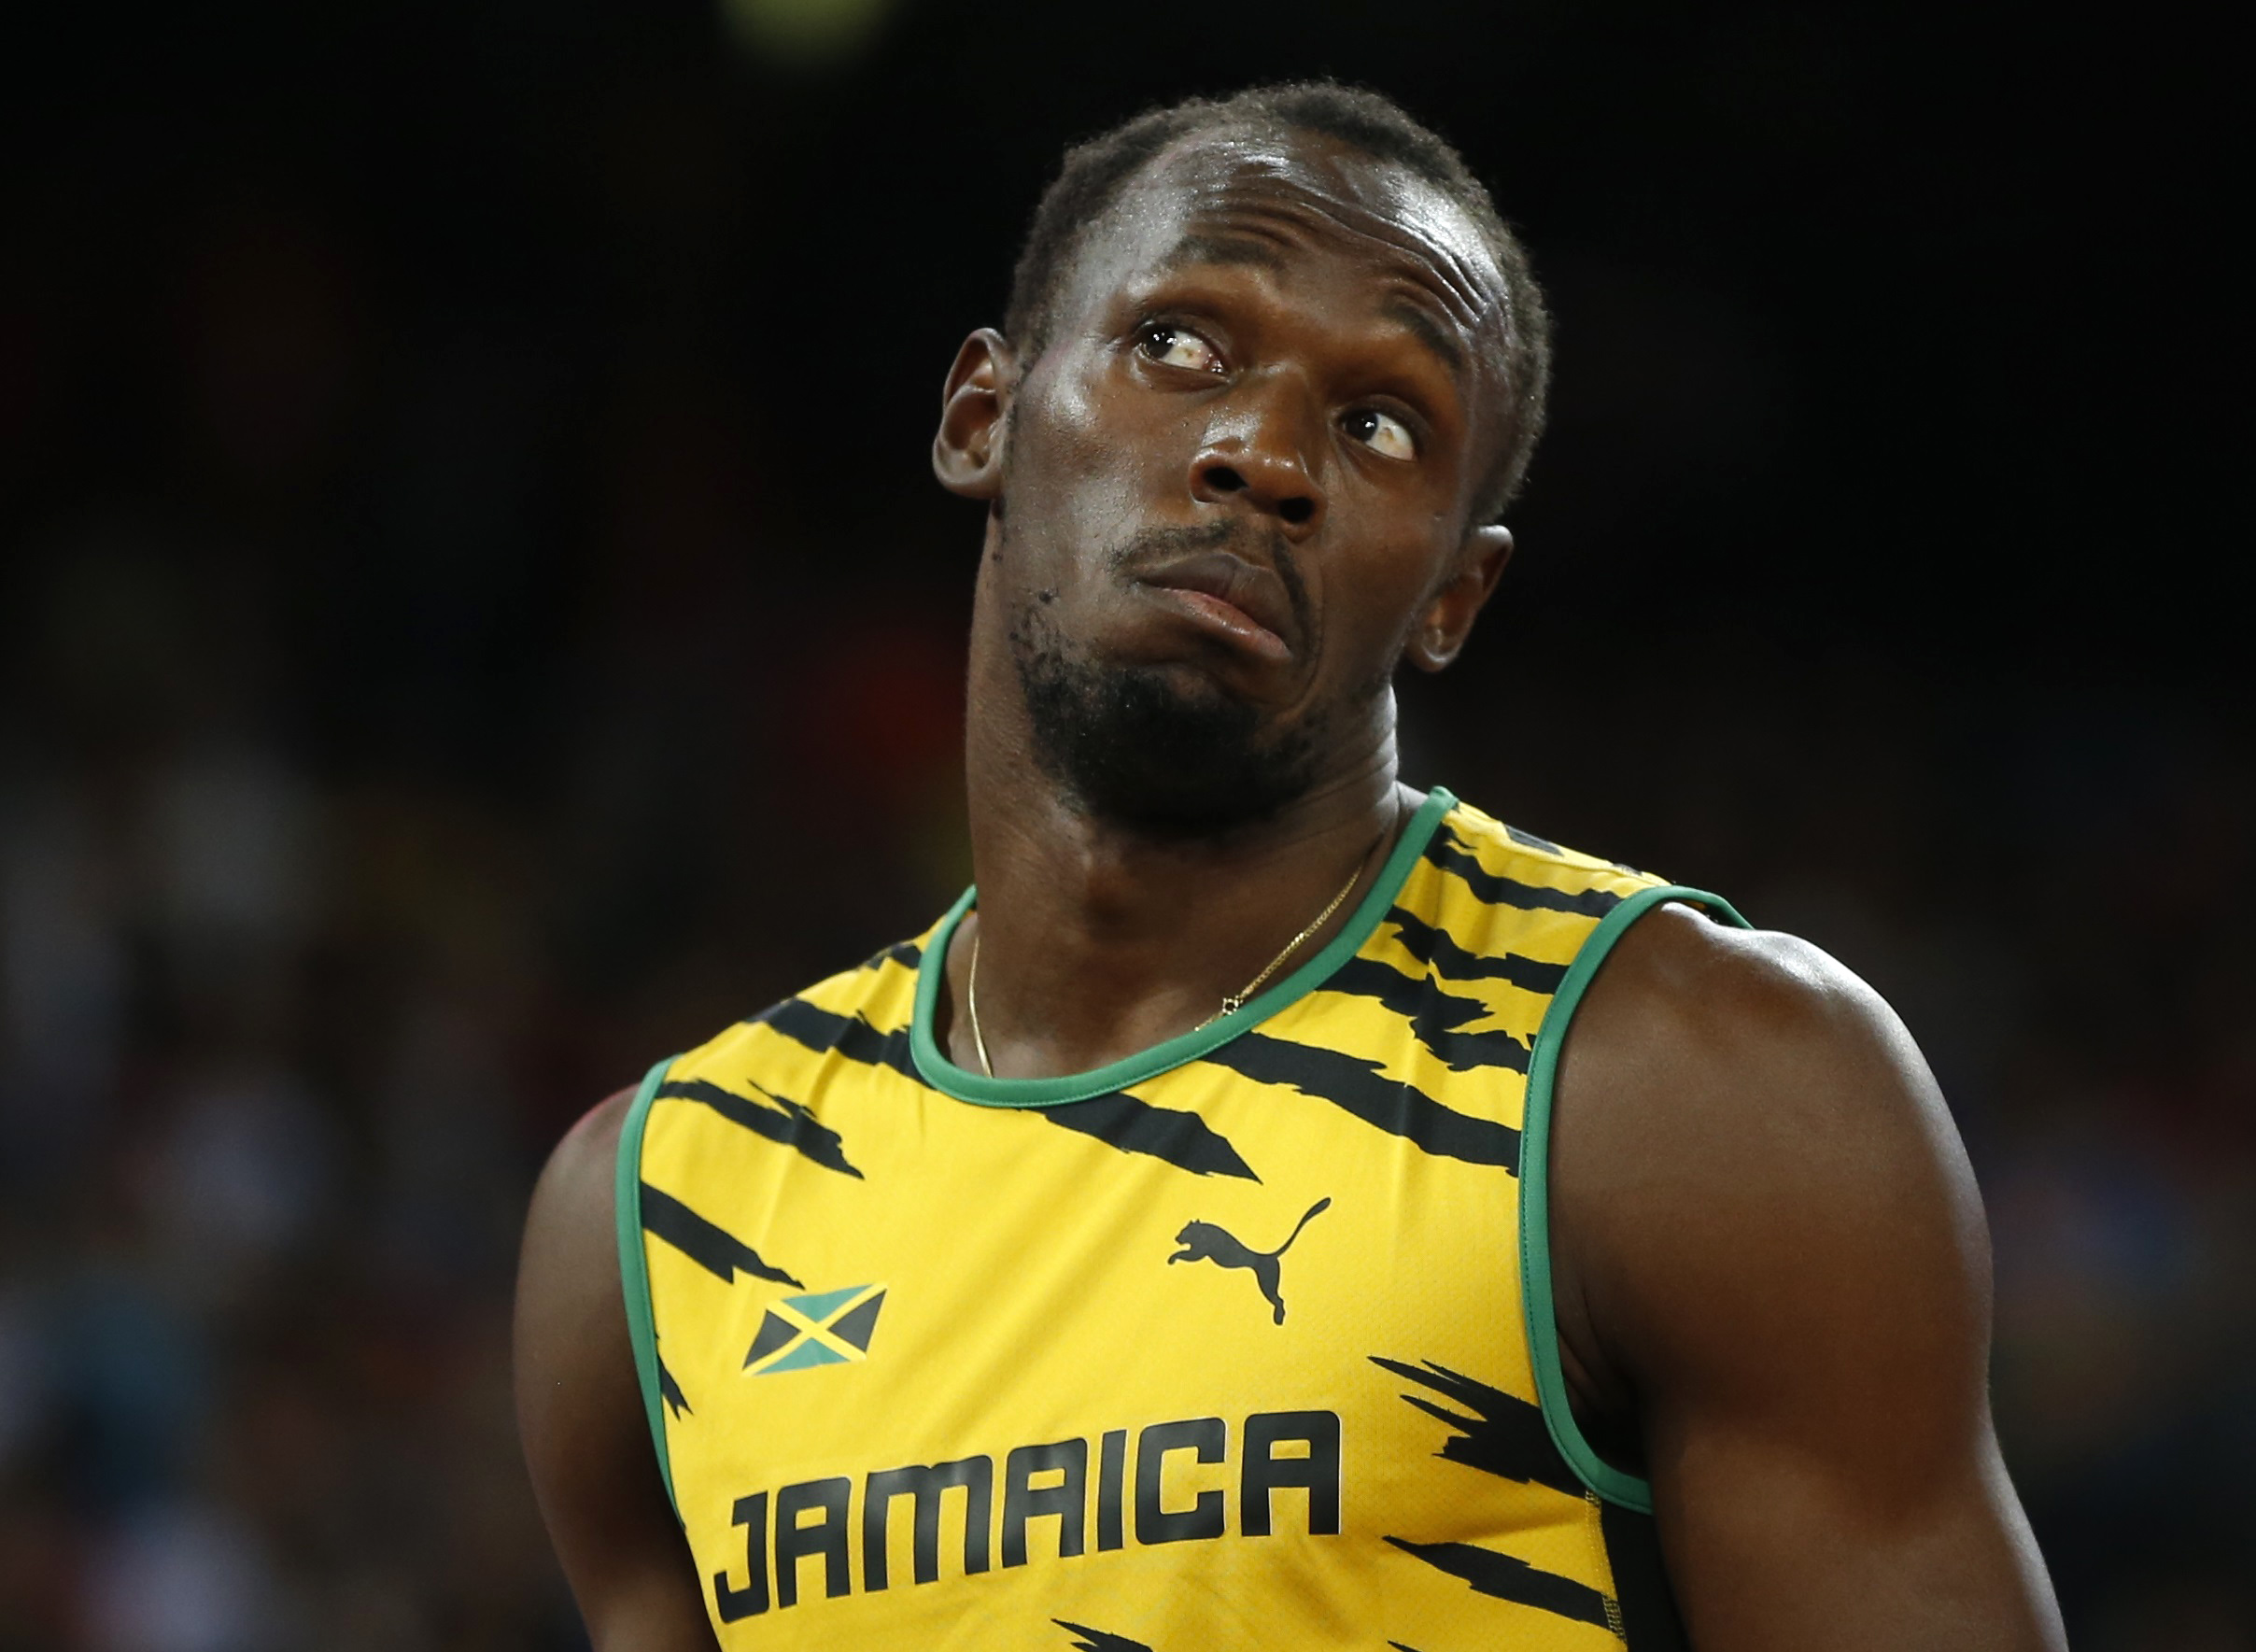 Presure? What pressure? Usain Bolt in a confident mood on the track for the men's 200m heats at the world athletics championships in Beijing. Photo: Reuters